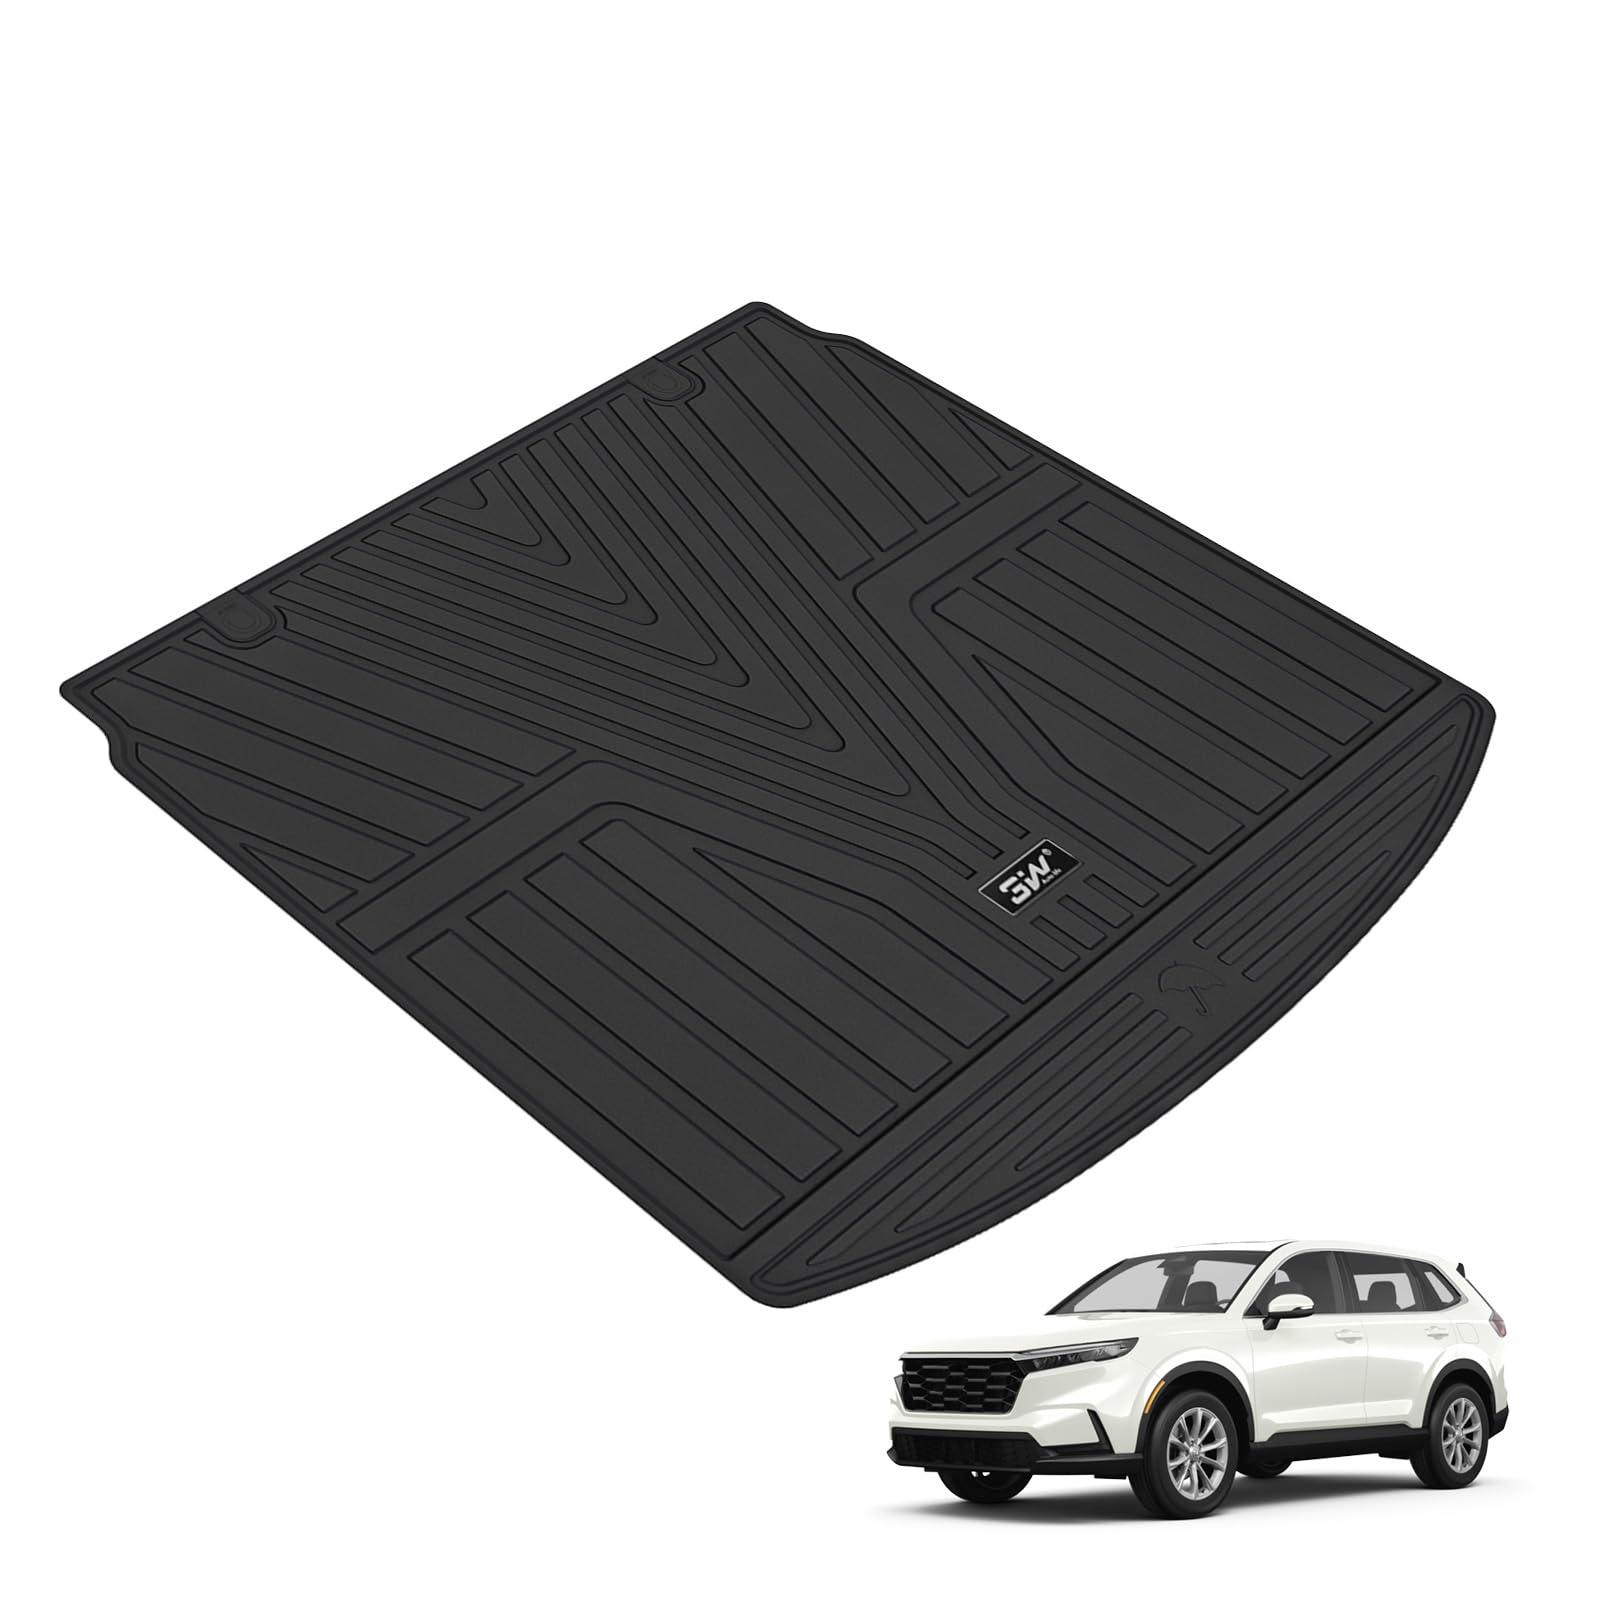 3W Honda CR-V 2023-2025 Custom Floor Mats(Include Hybrid) / Trunk Mat(Non Hybrid) CRV TPE Material & All-Weather Protection Vehicles & Parts 3Wliners 2023-2025 CR-V 2023-2025 Trunk Mat